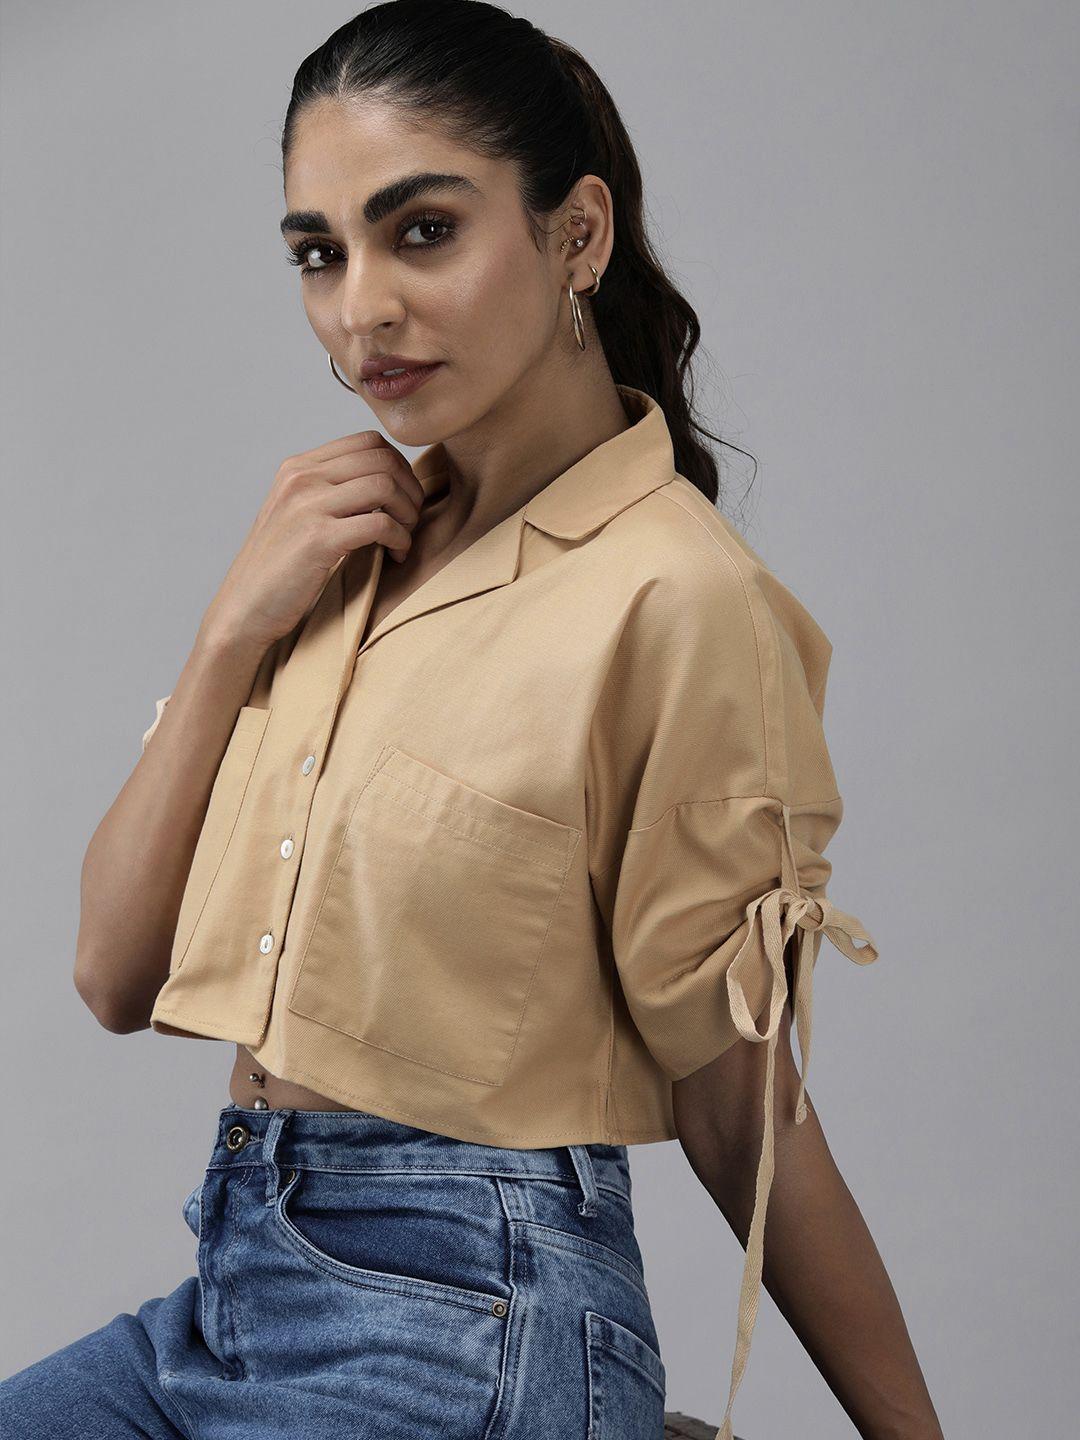 the-roadster-lifestyle-co.-women-solid-boxy-pure-cotton-casual-crop-shirt